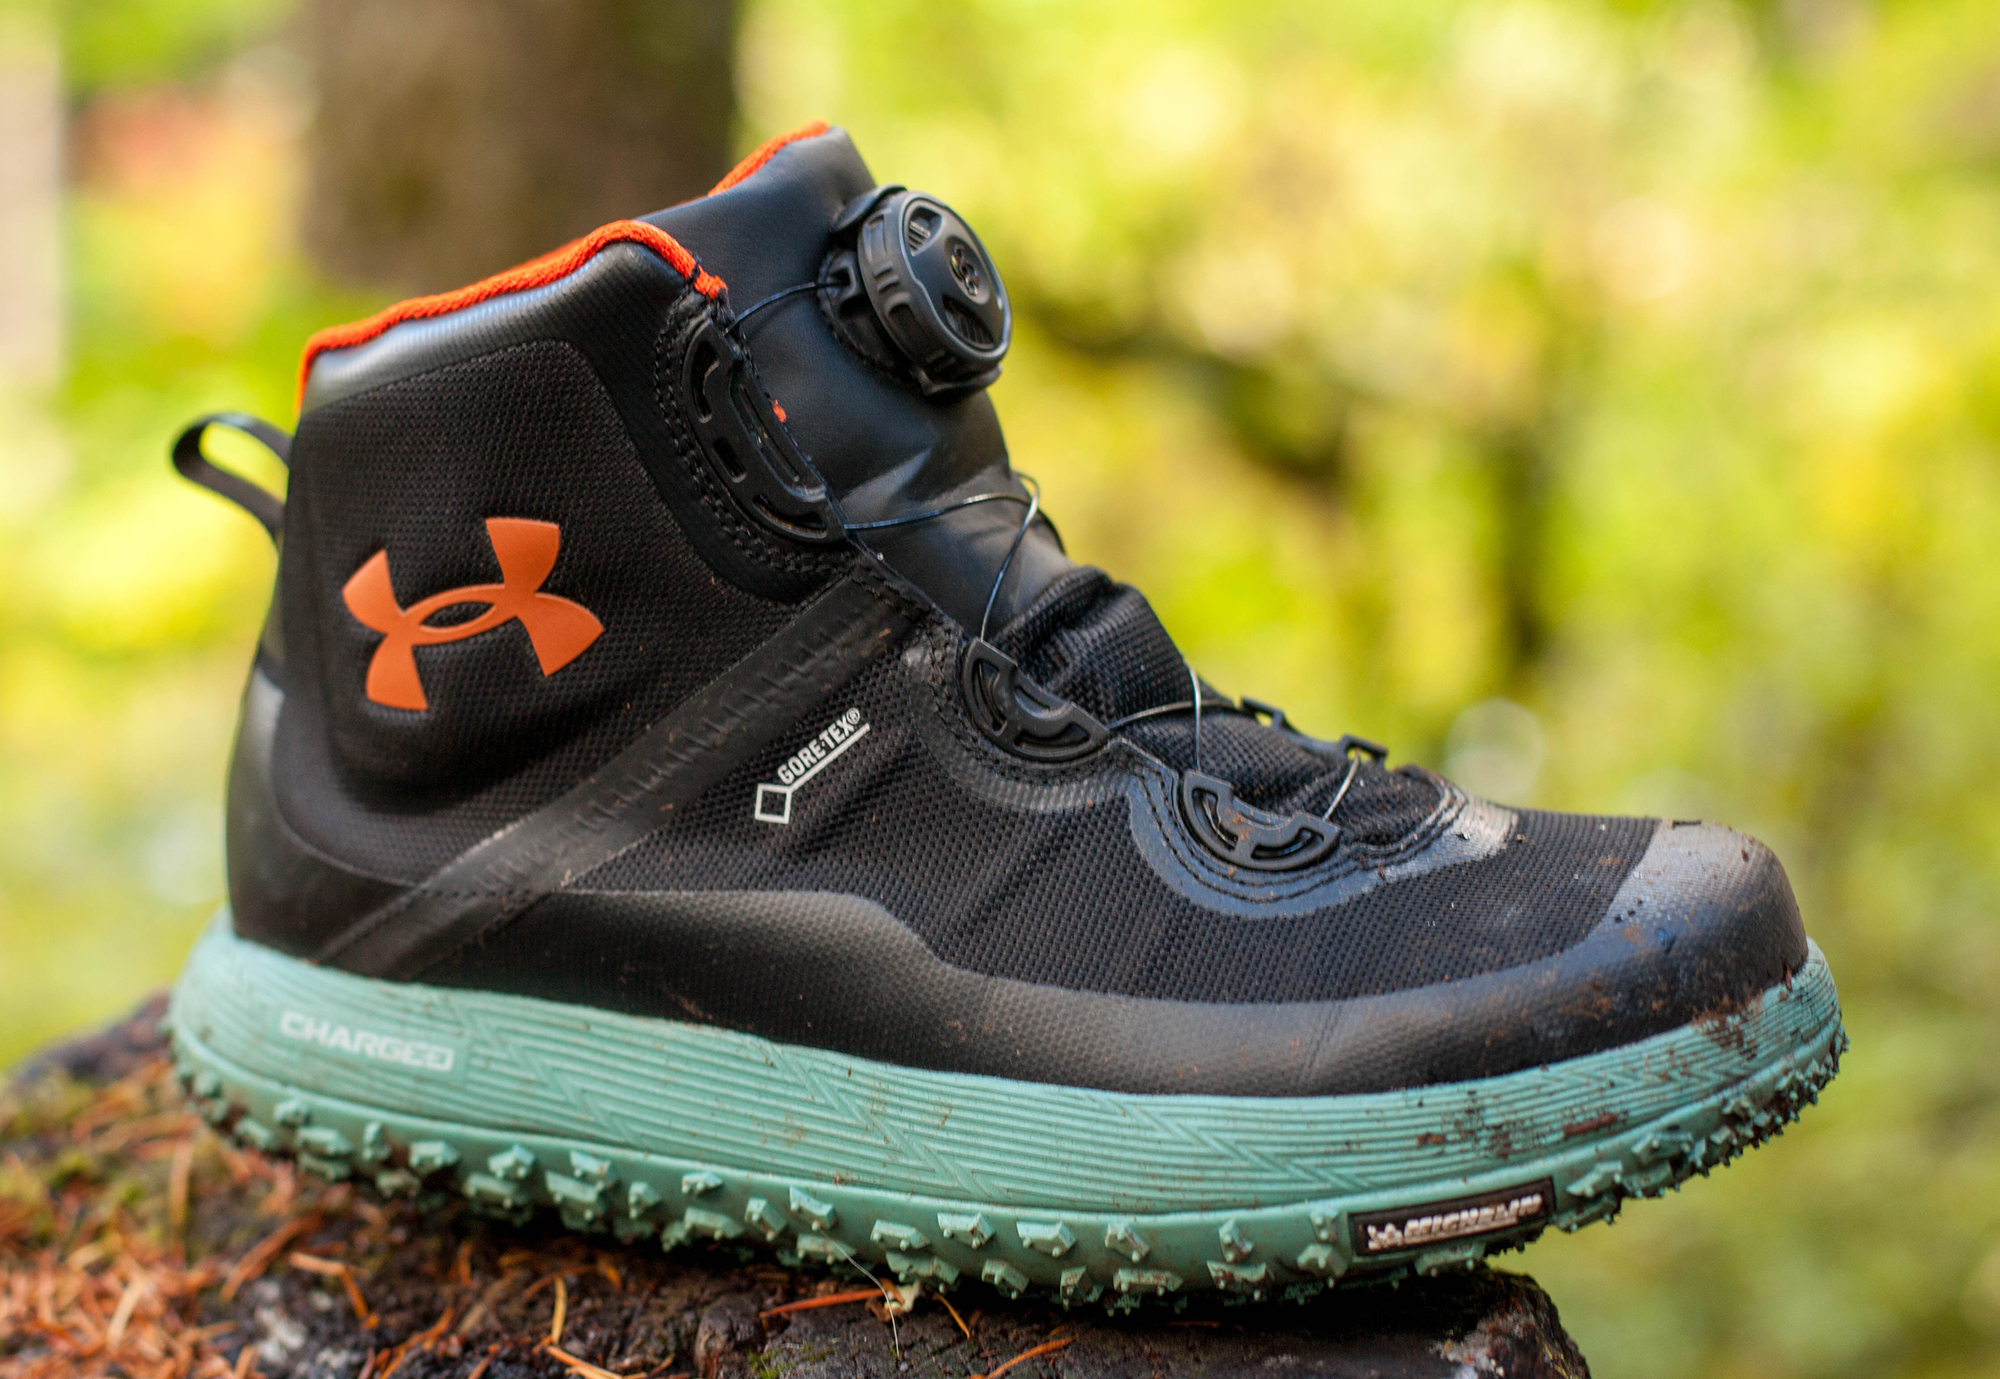 Gear Review: UA Fat Tire Boots | Field Mag